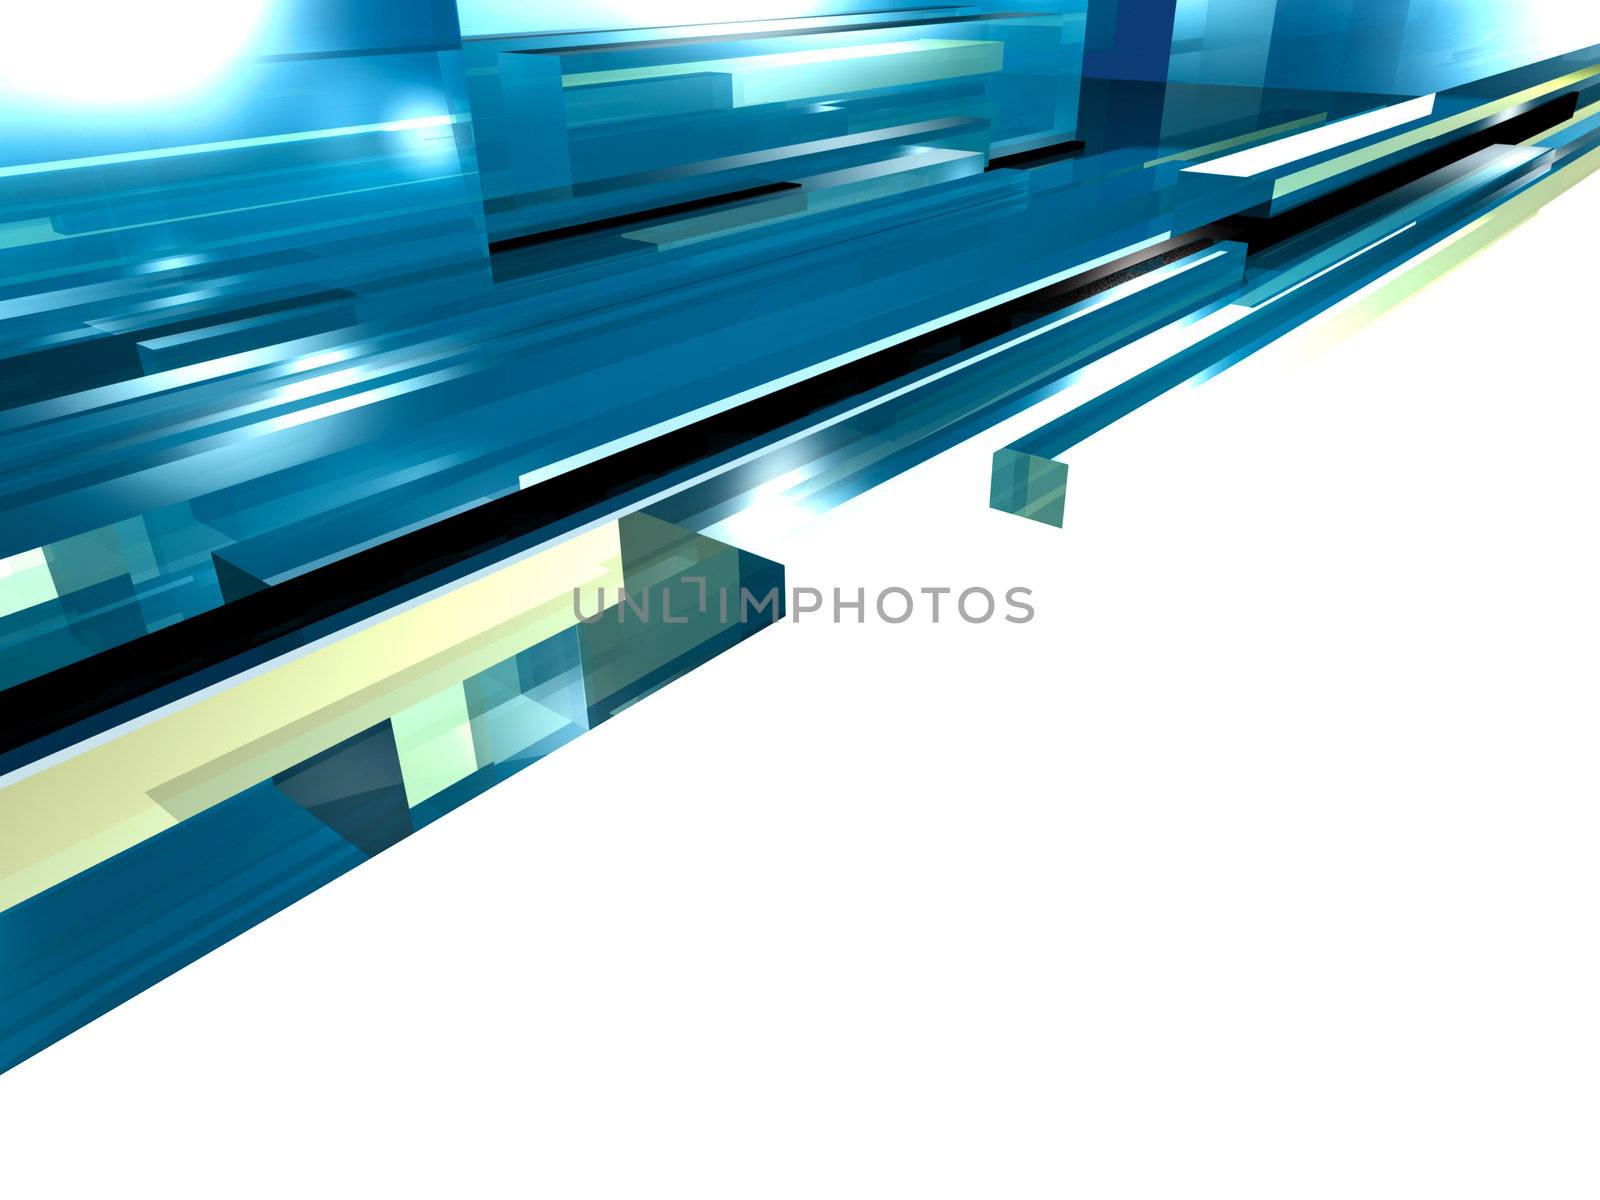 An image of a nice blue abstract glass background